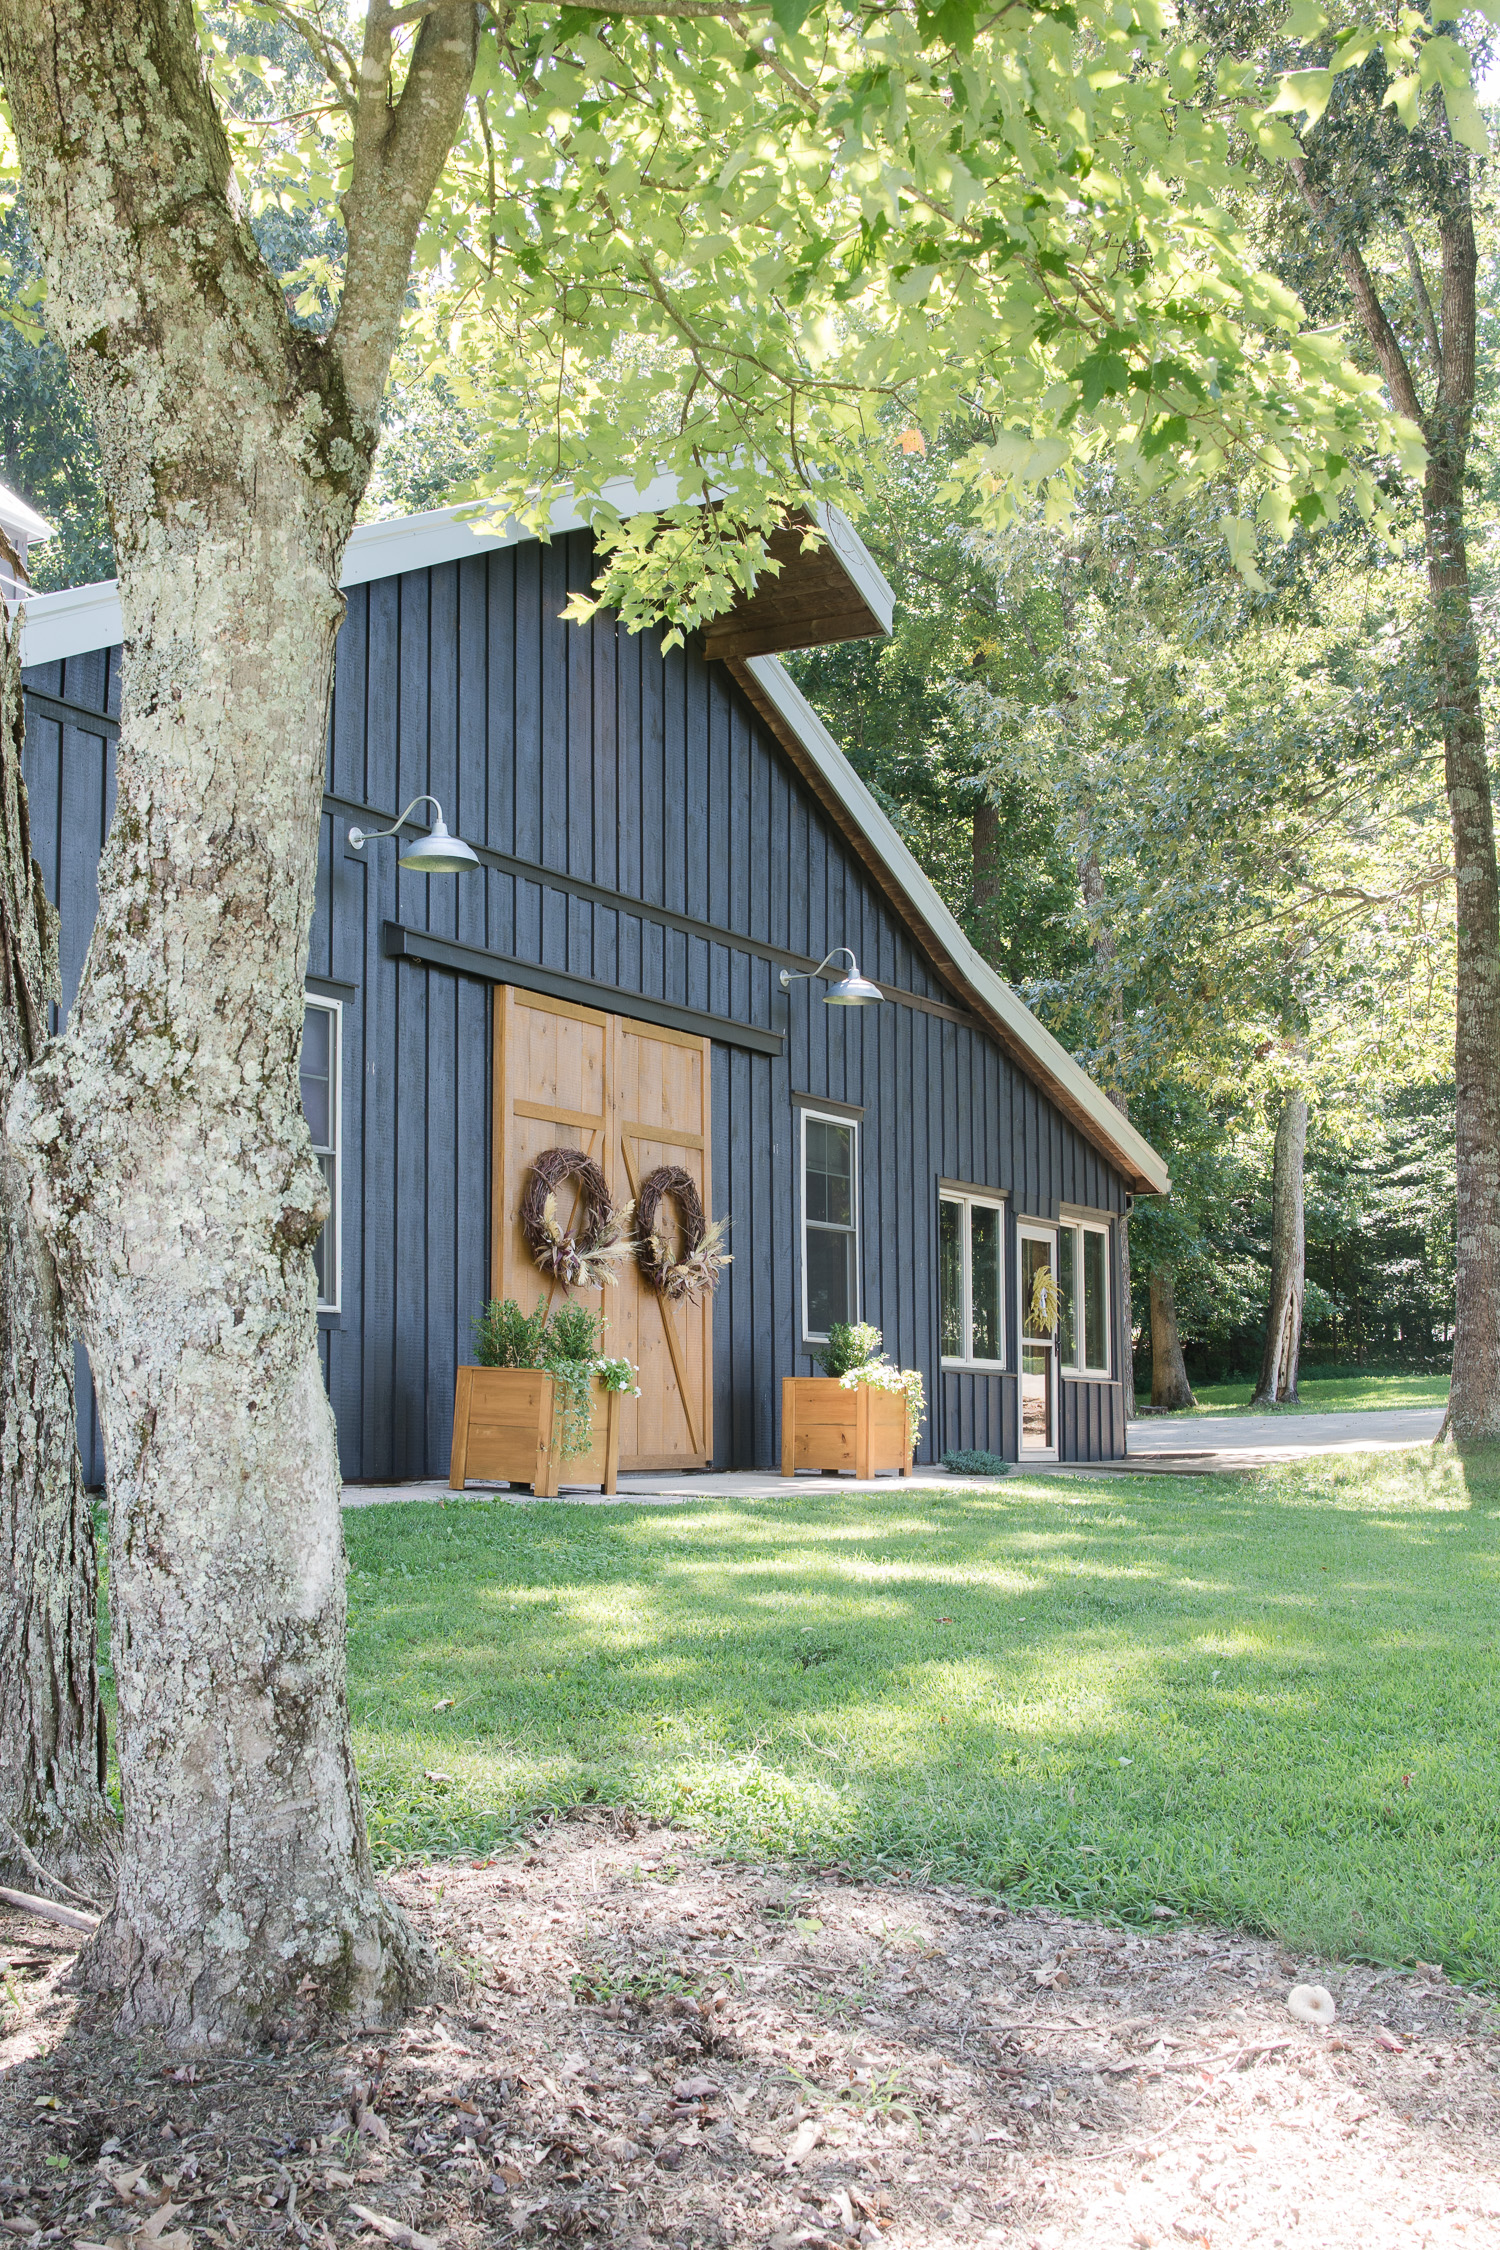 black barndominium with wood board and batten. Wood barn doors, with large wreaths, planters and galvanized barn lights